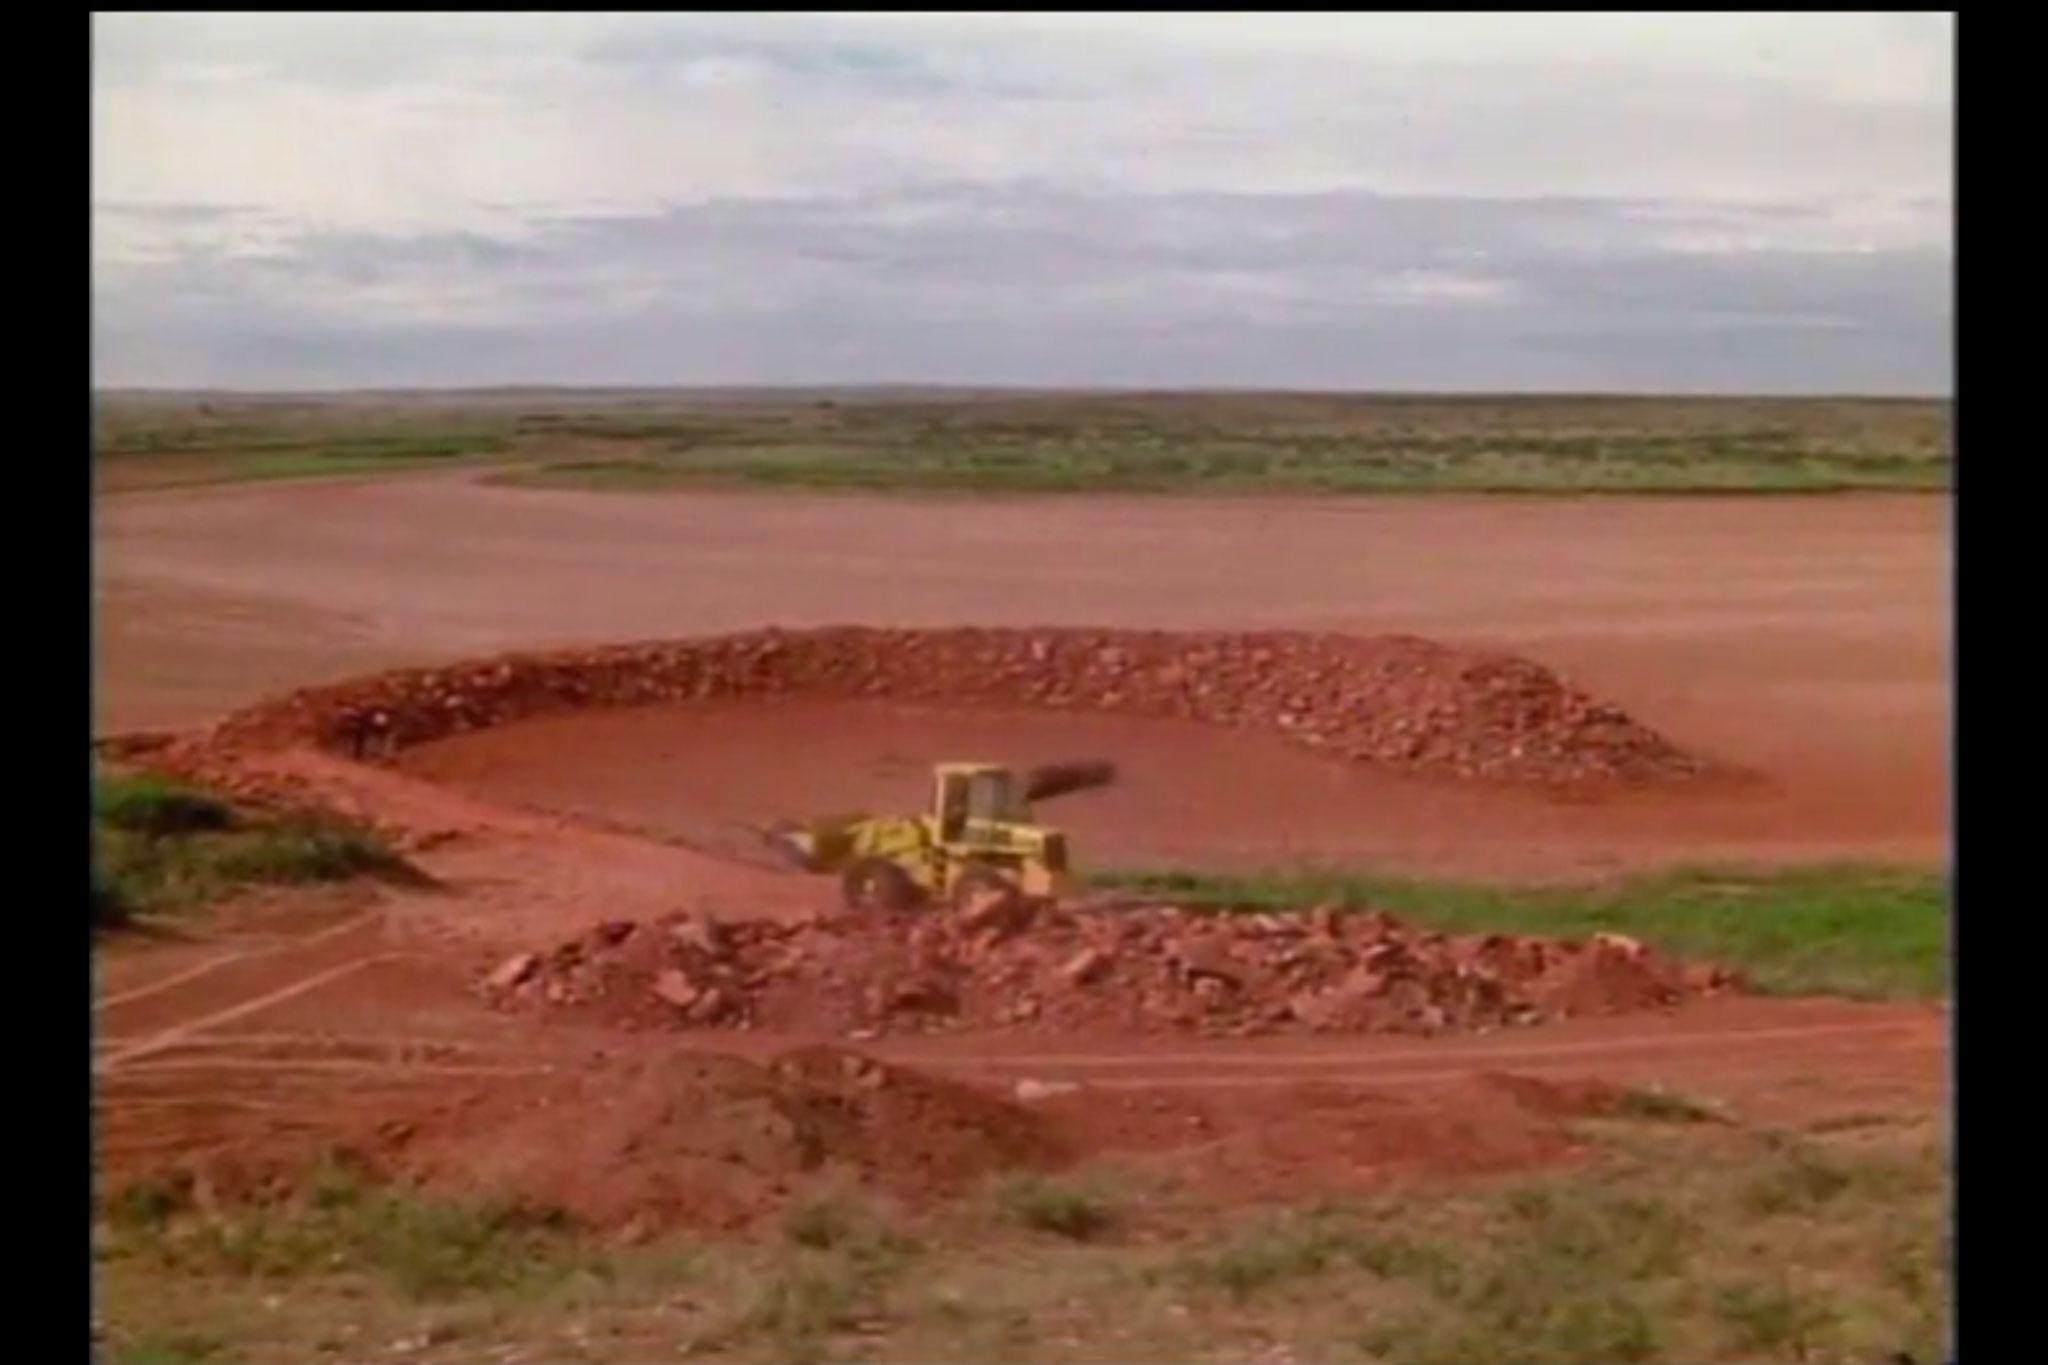 a circular ramp made of earth, emerging out of a dry lakebed